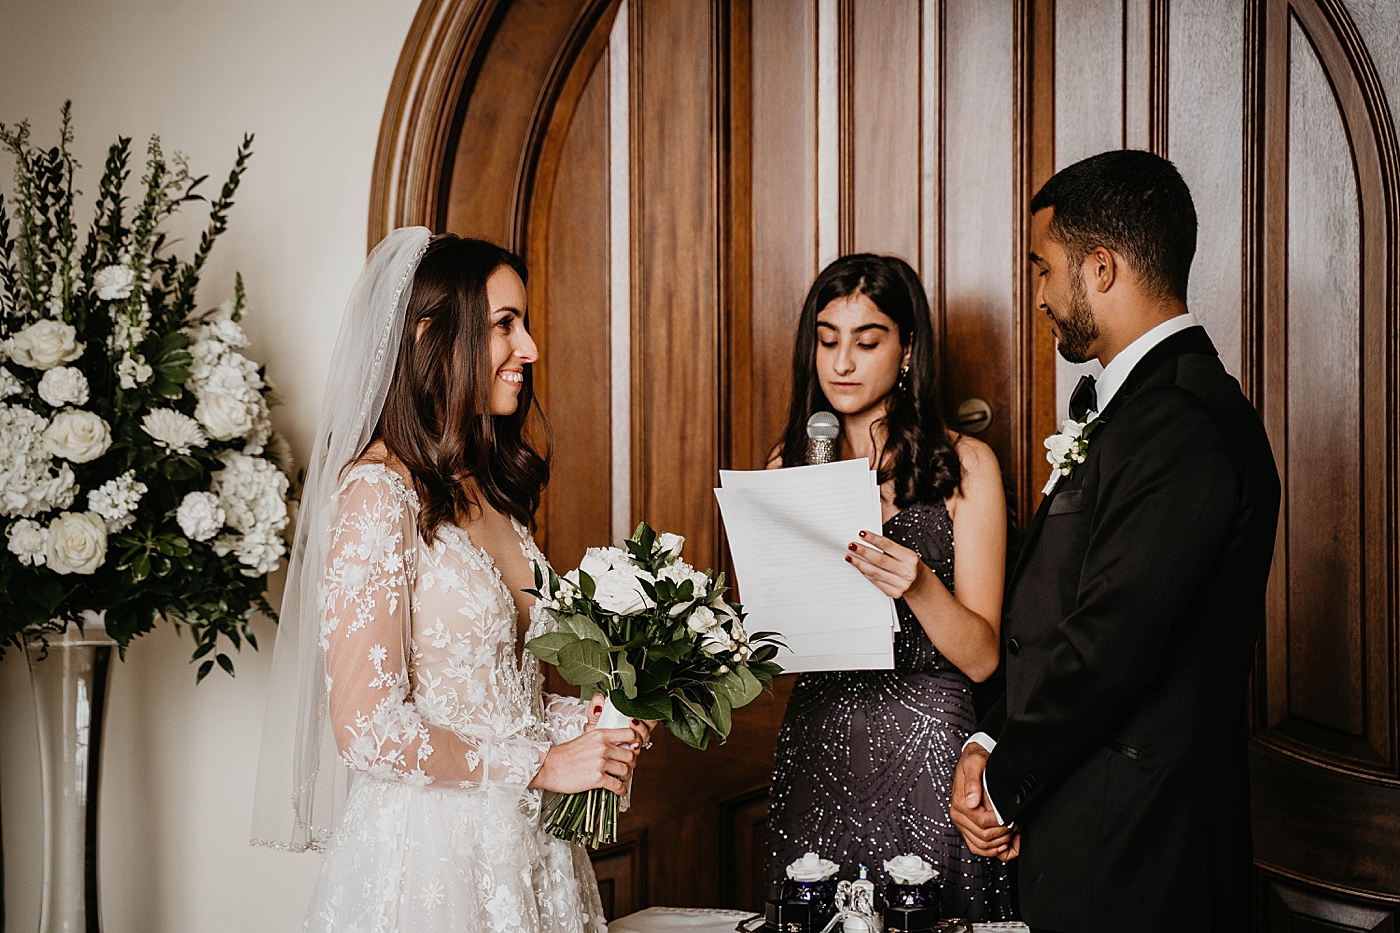 Bride and Groom saying their vows Intimate Home Wedding captured by South Florida Wedding Photographer Krystal Capone Photography